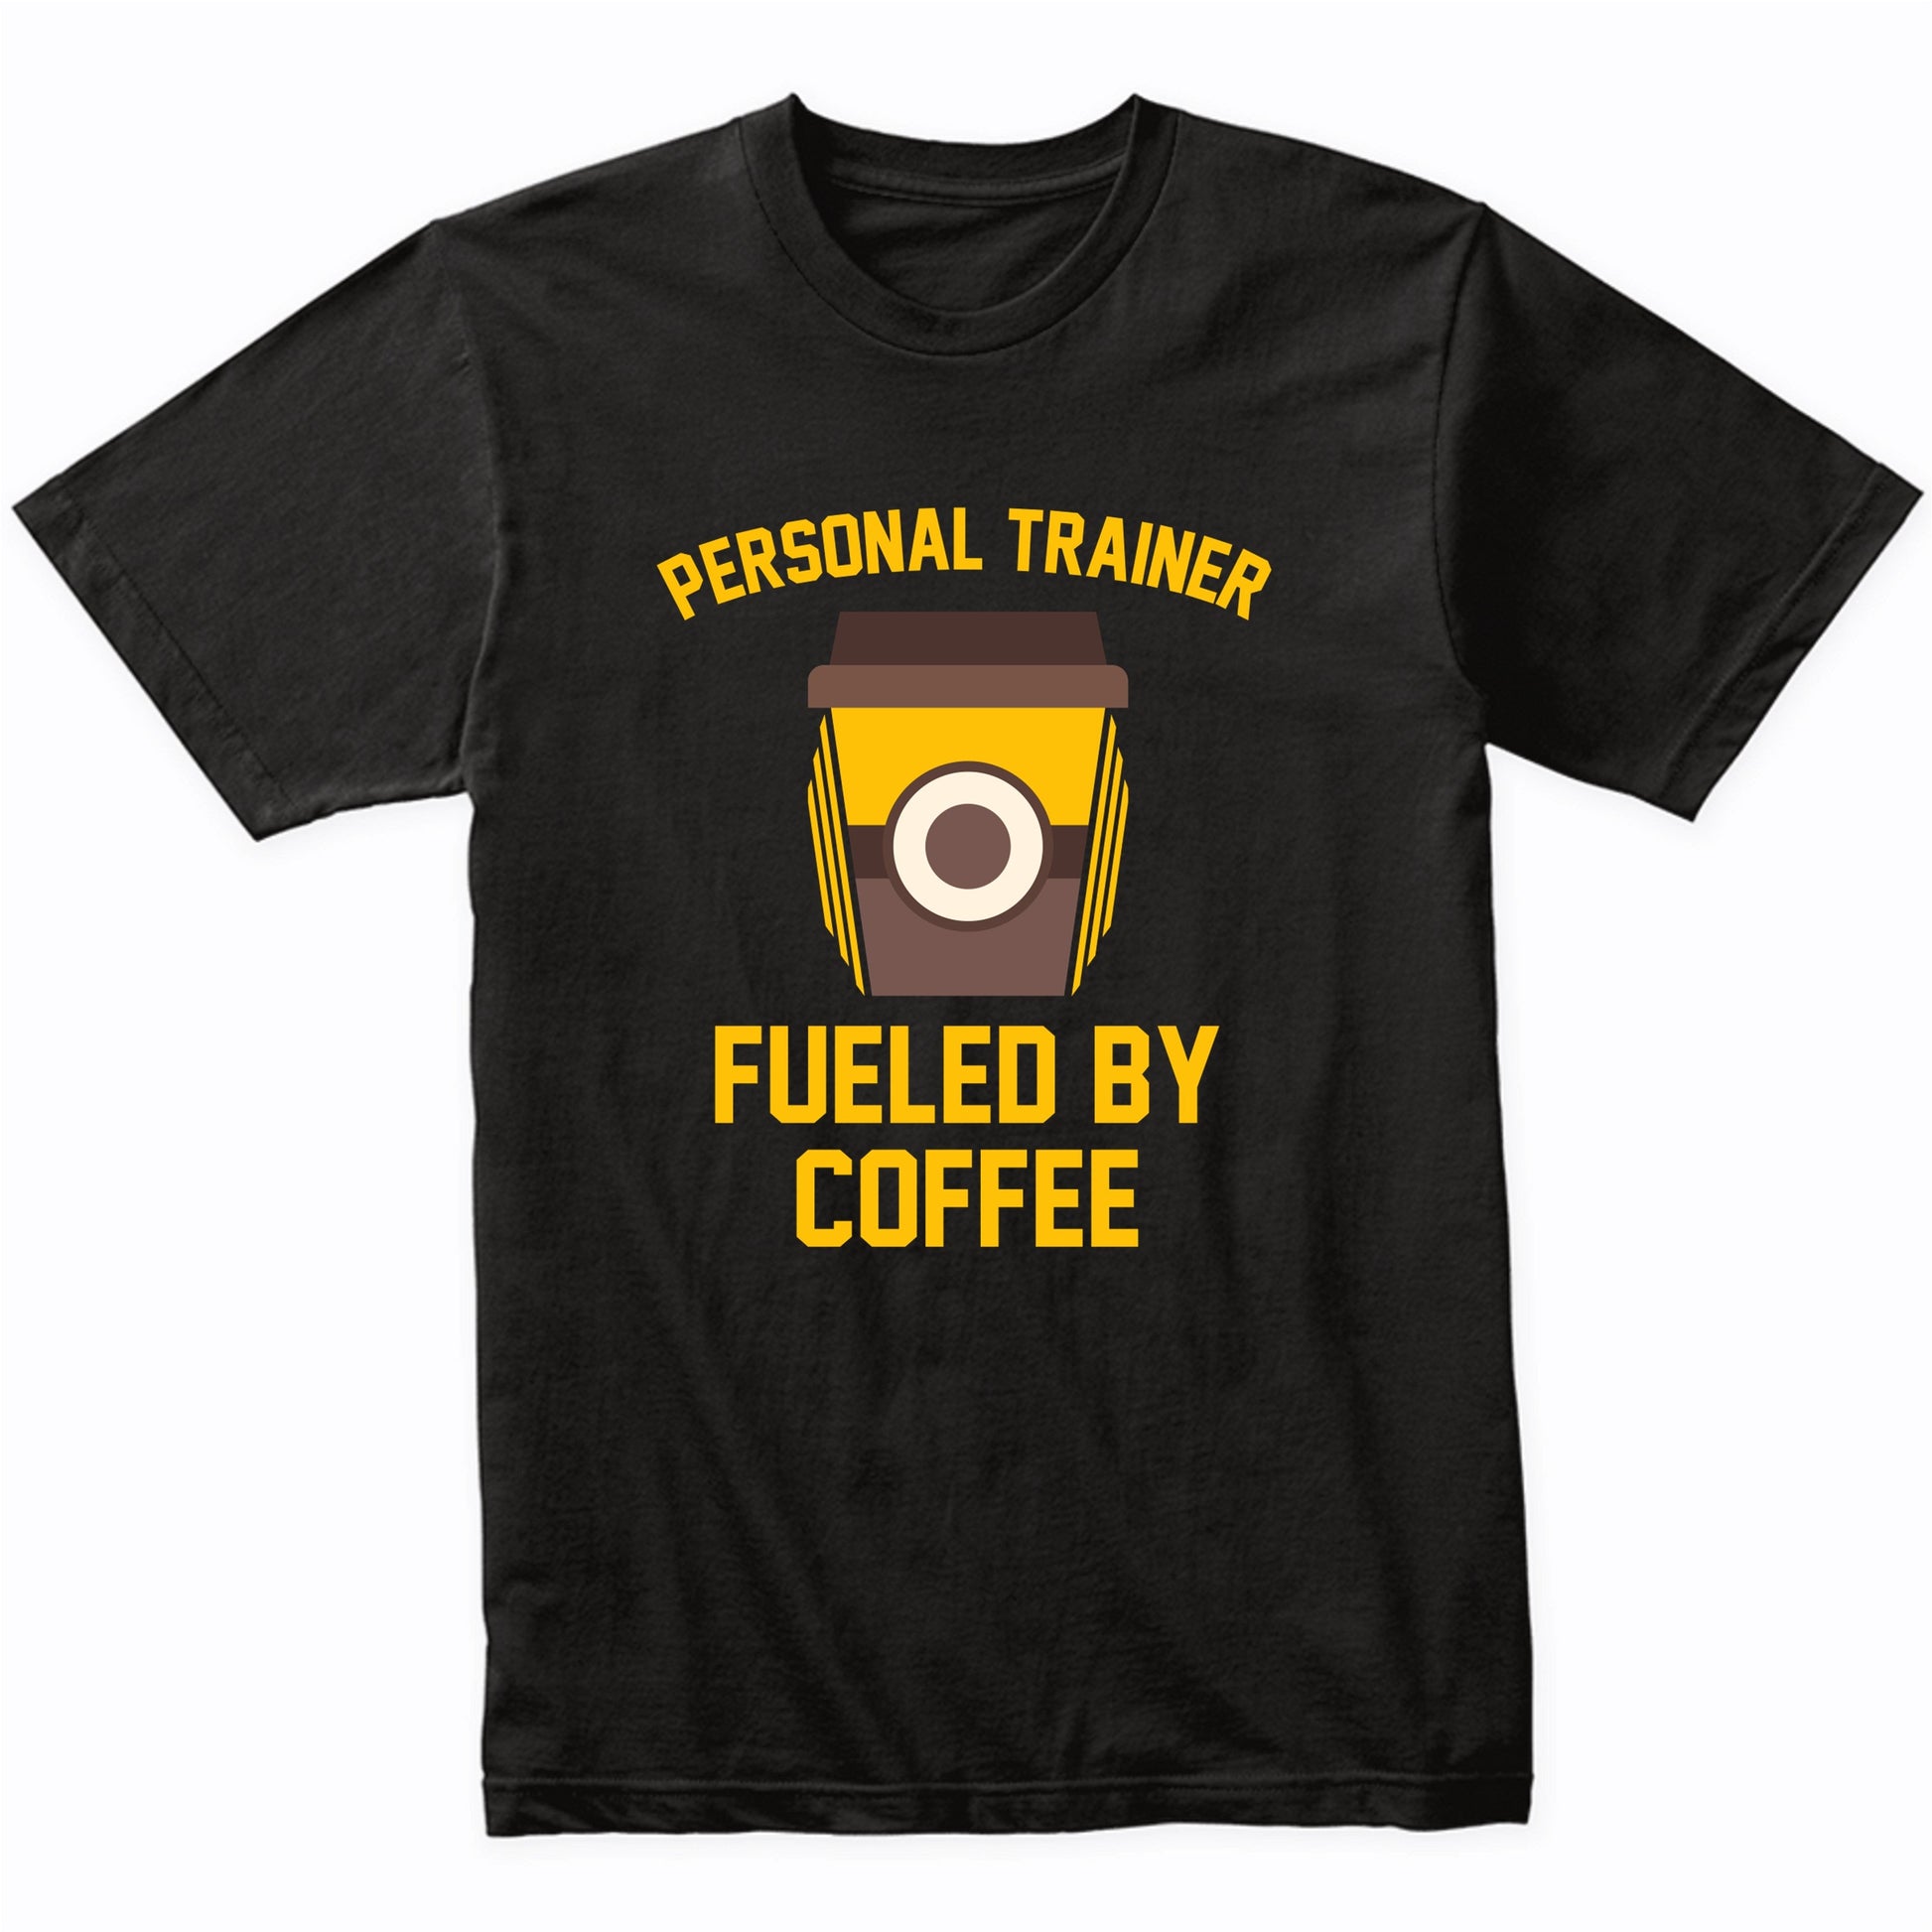 Personal Trainer Fueled By Coffee Funny Shirt